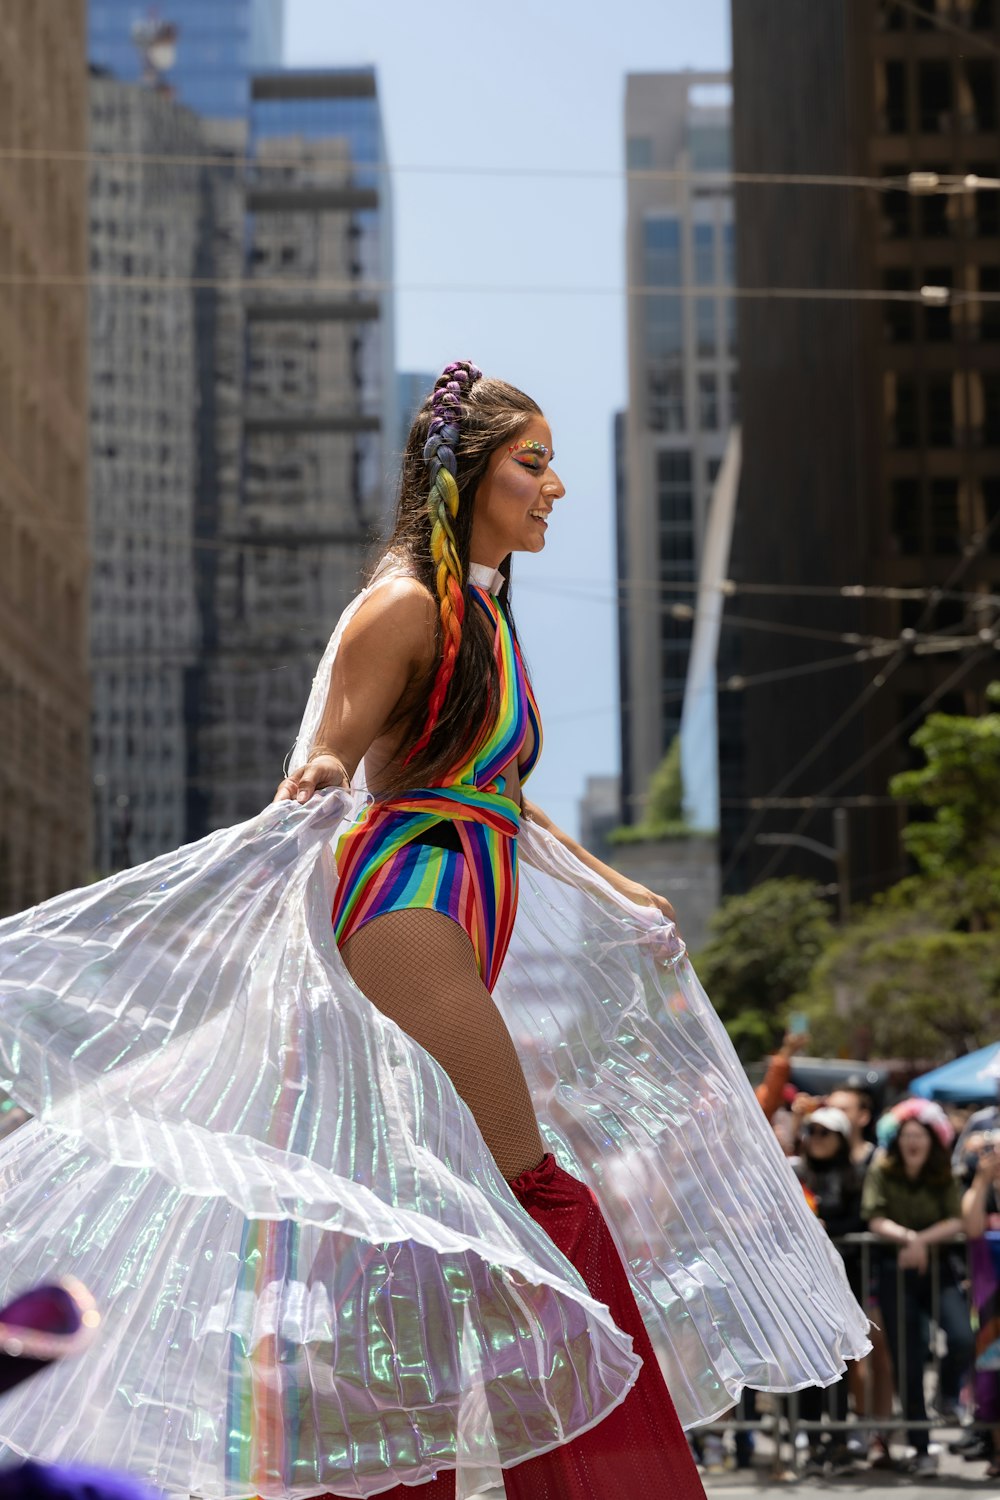 a person in a dress and a colorful dress walking in a city